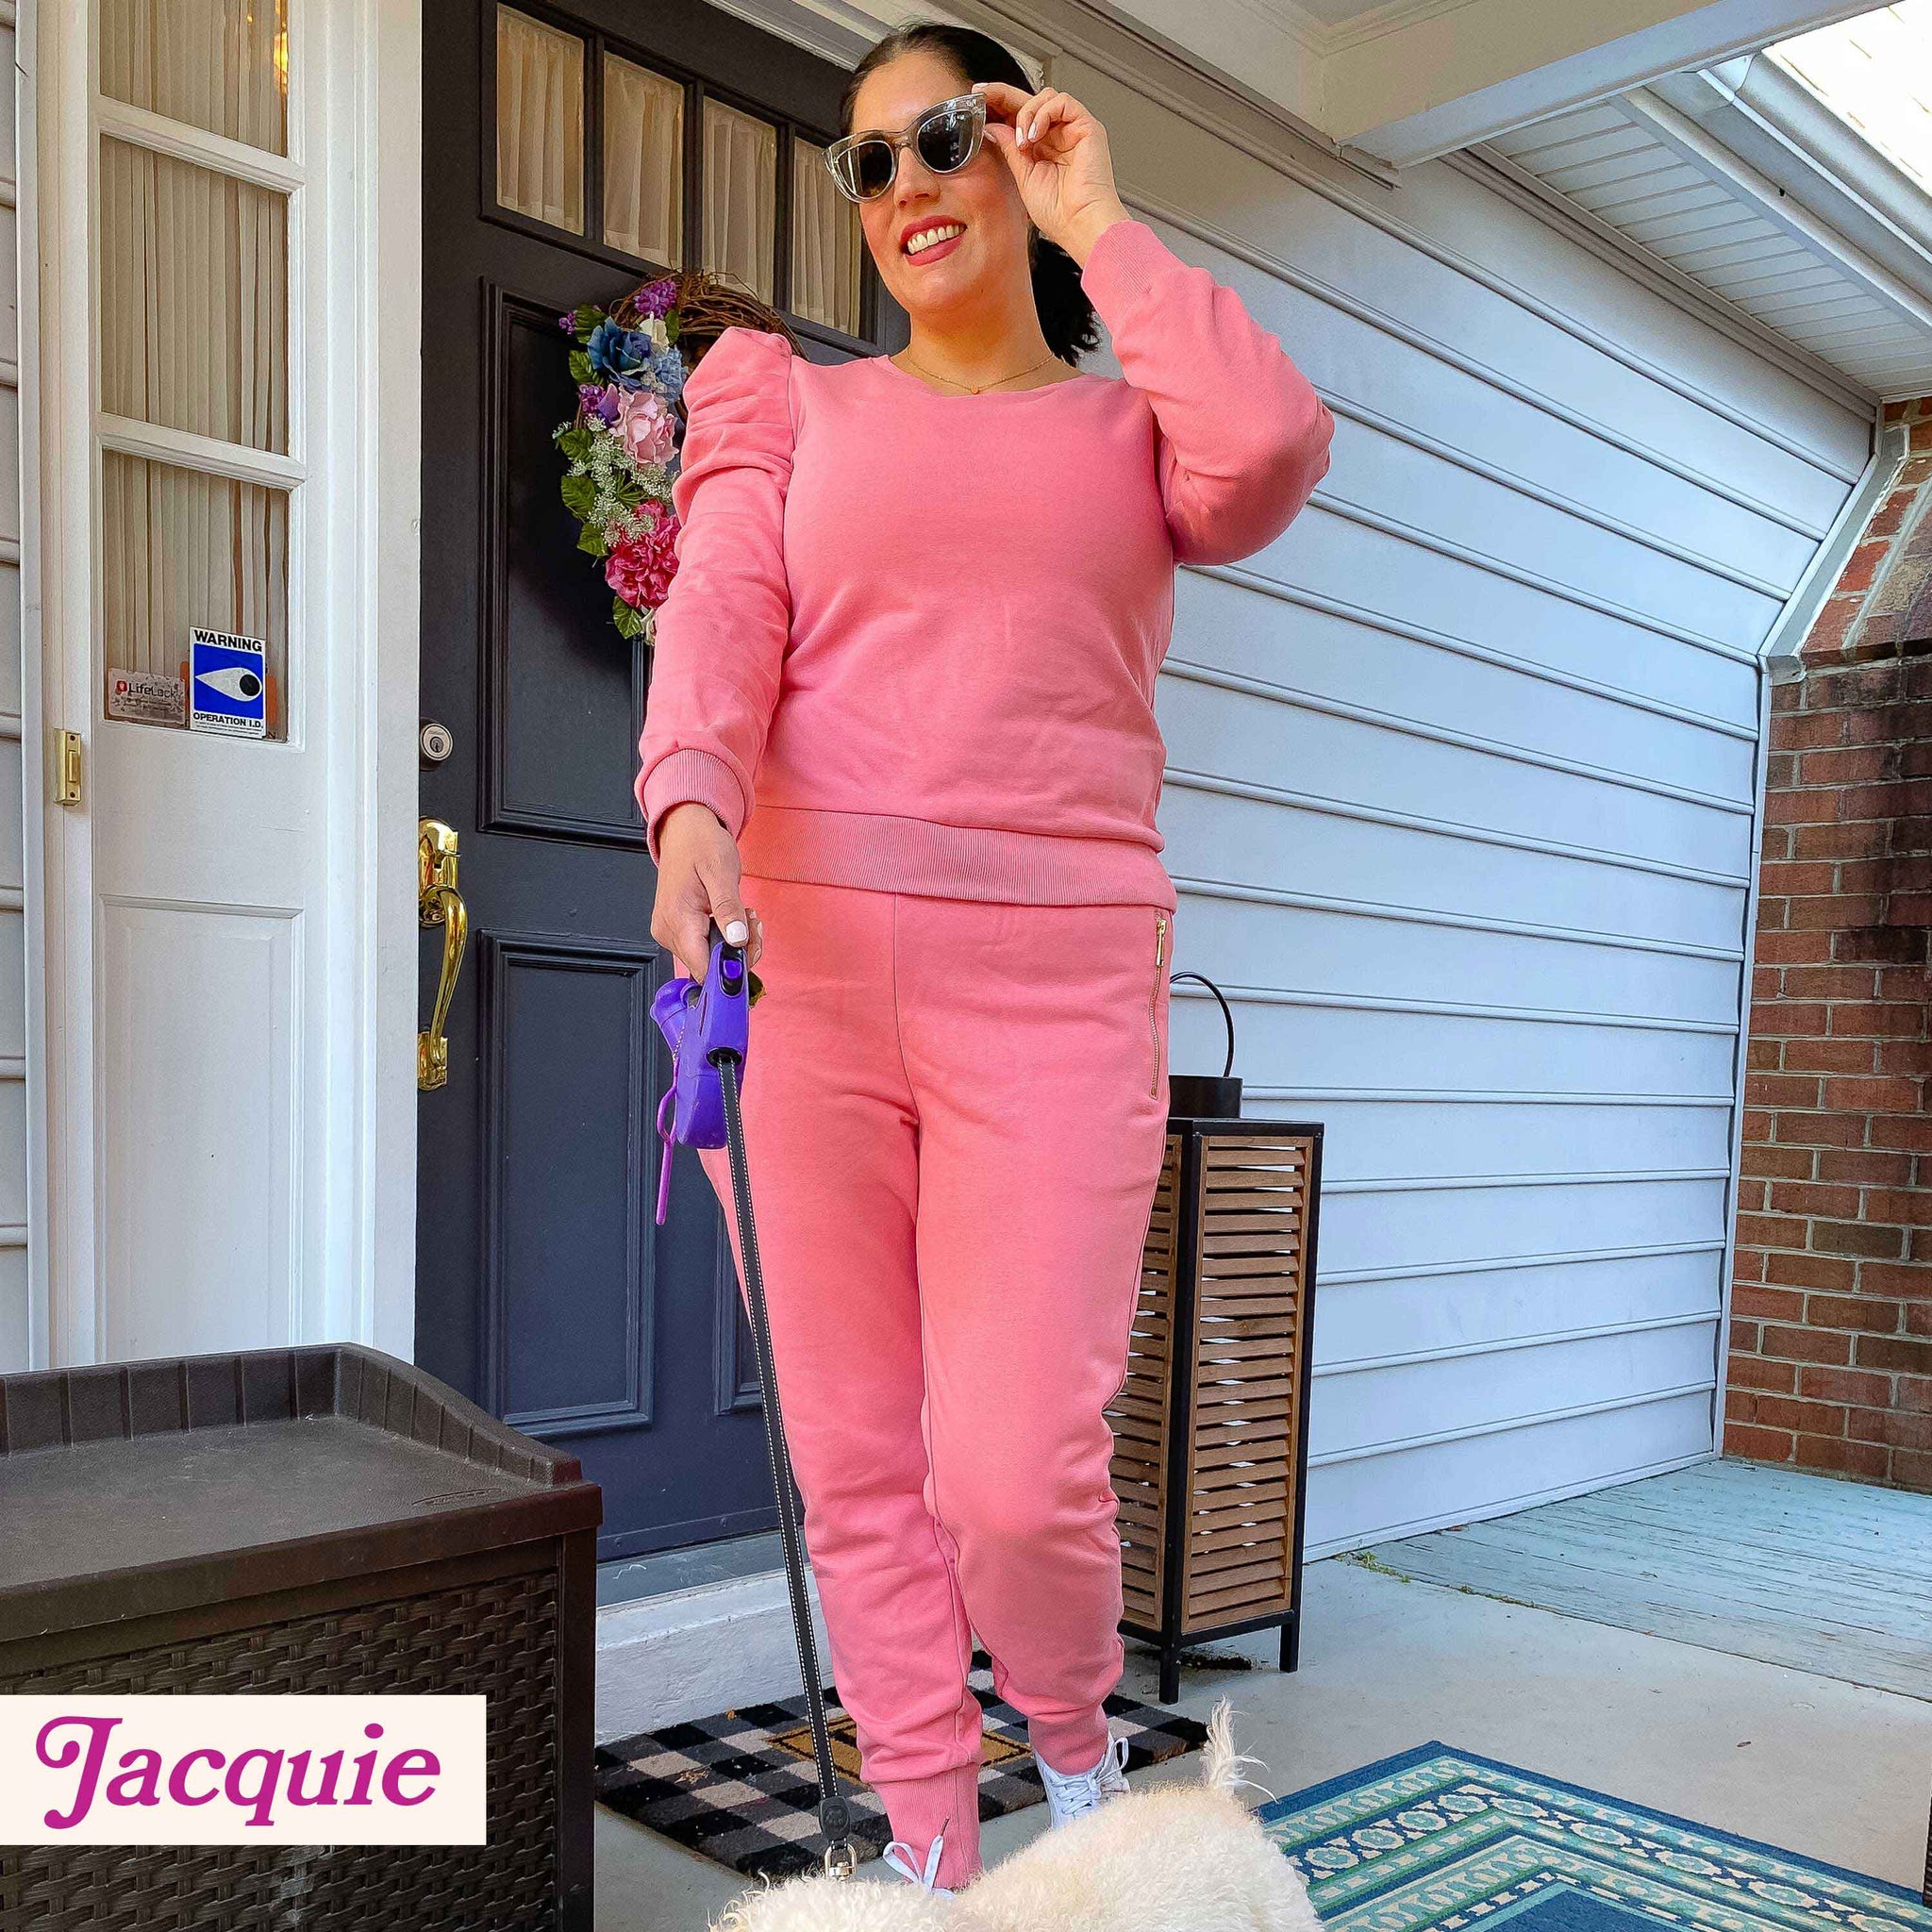 Jacquie wears The Happily Eva After Collection Ruby Sweatpants